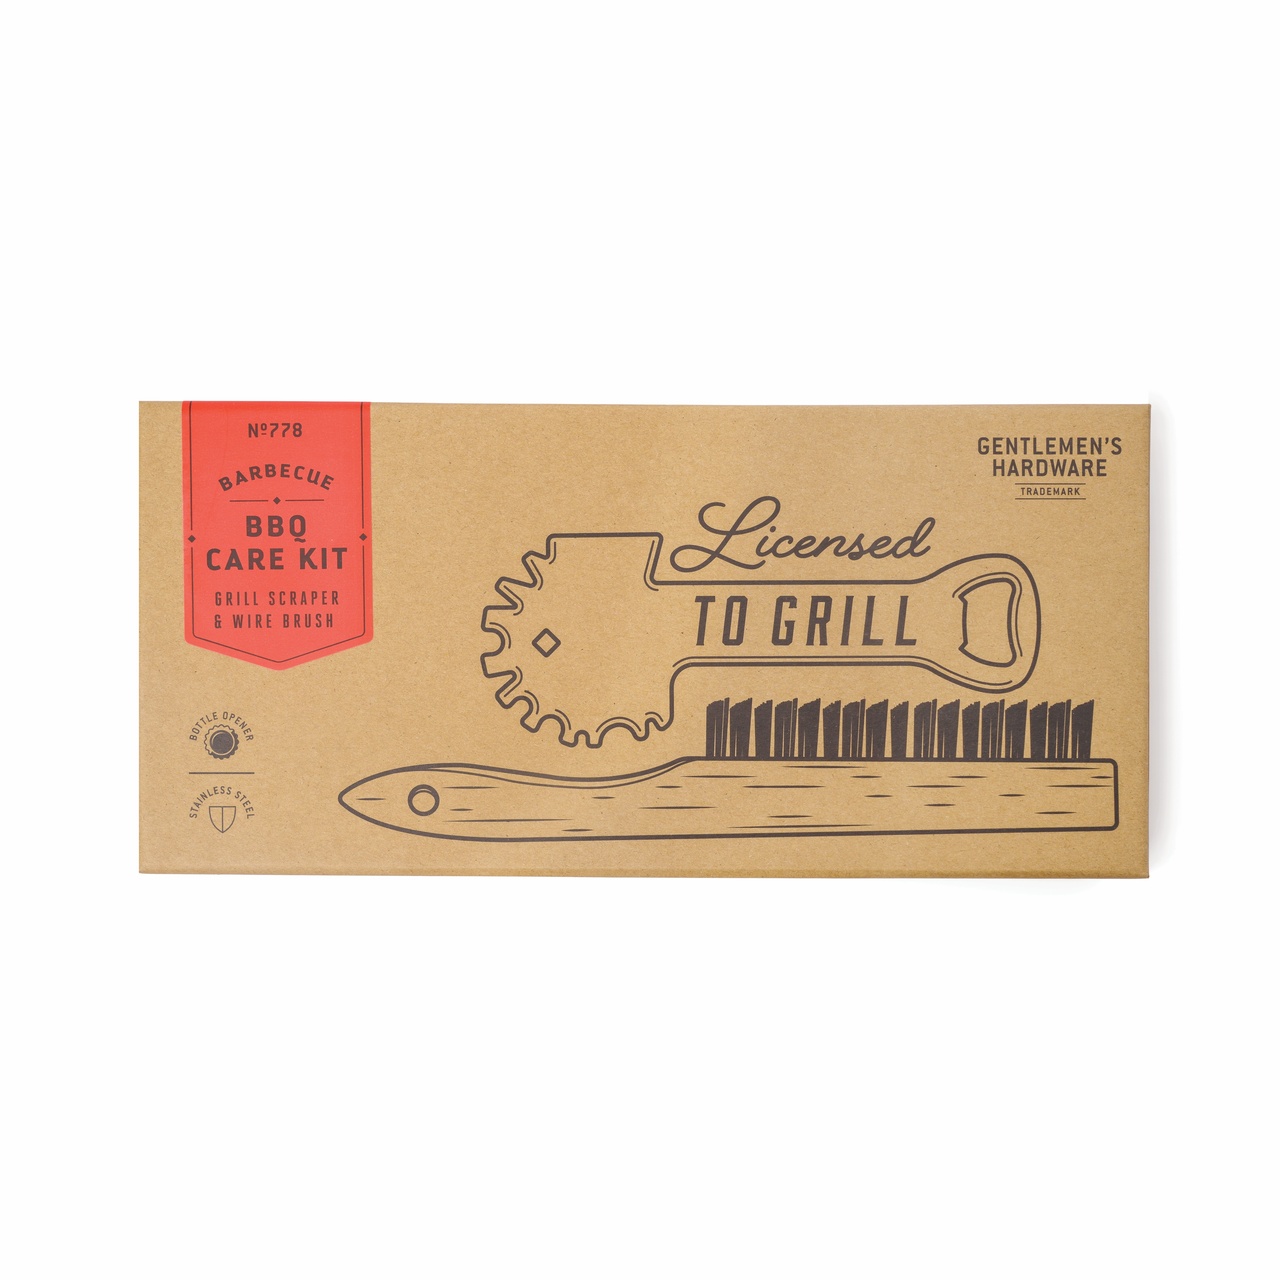 Grill care kit